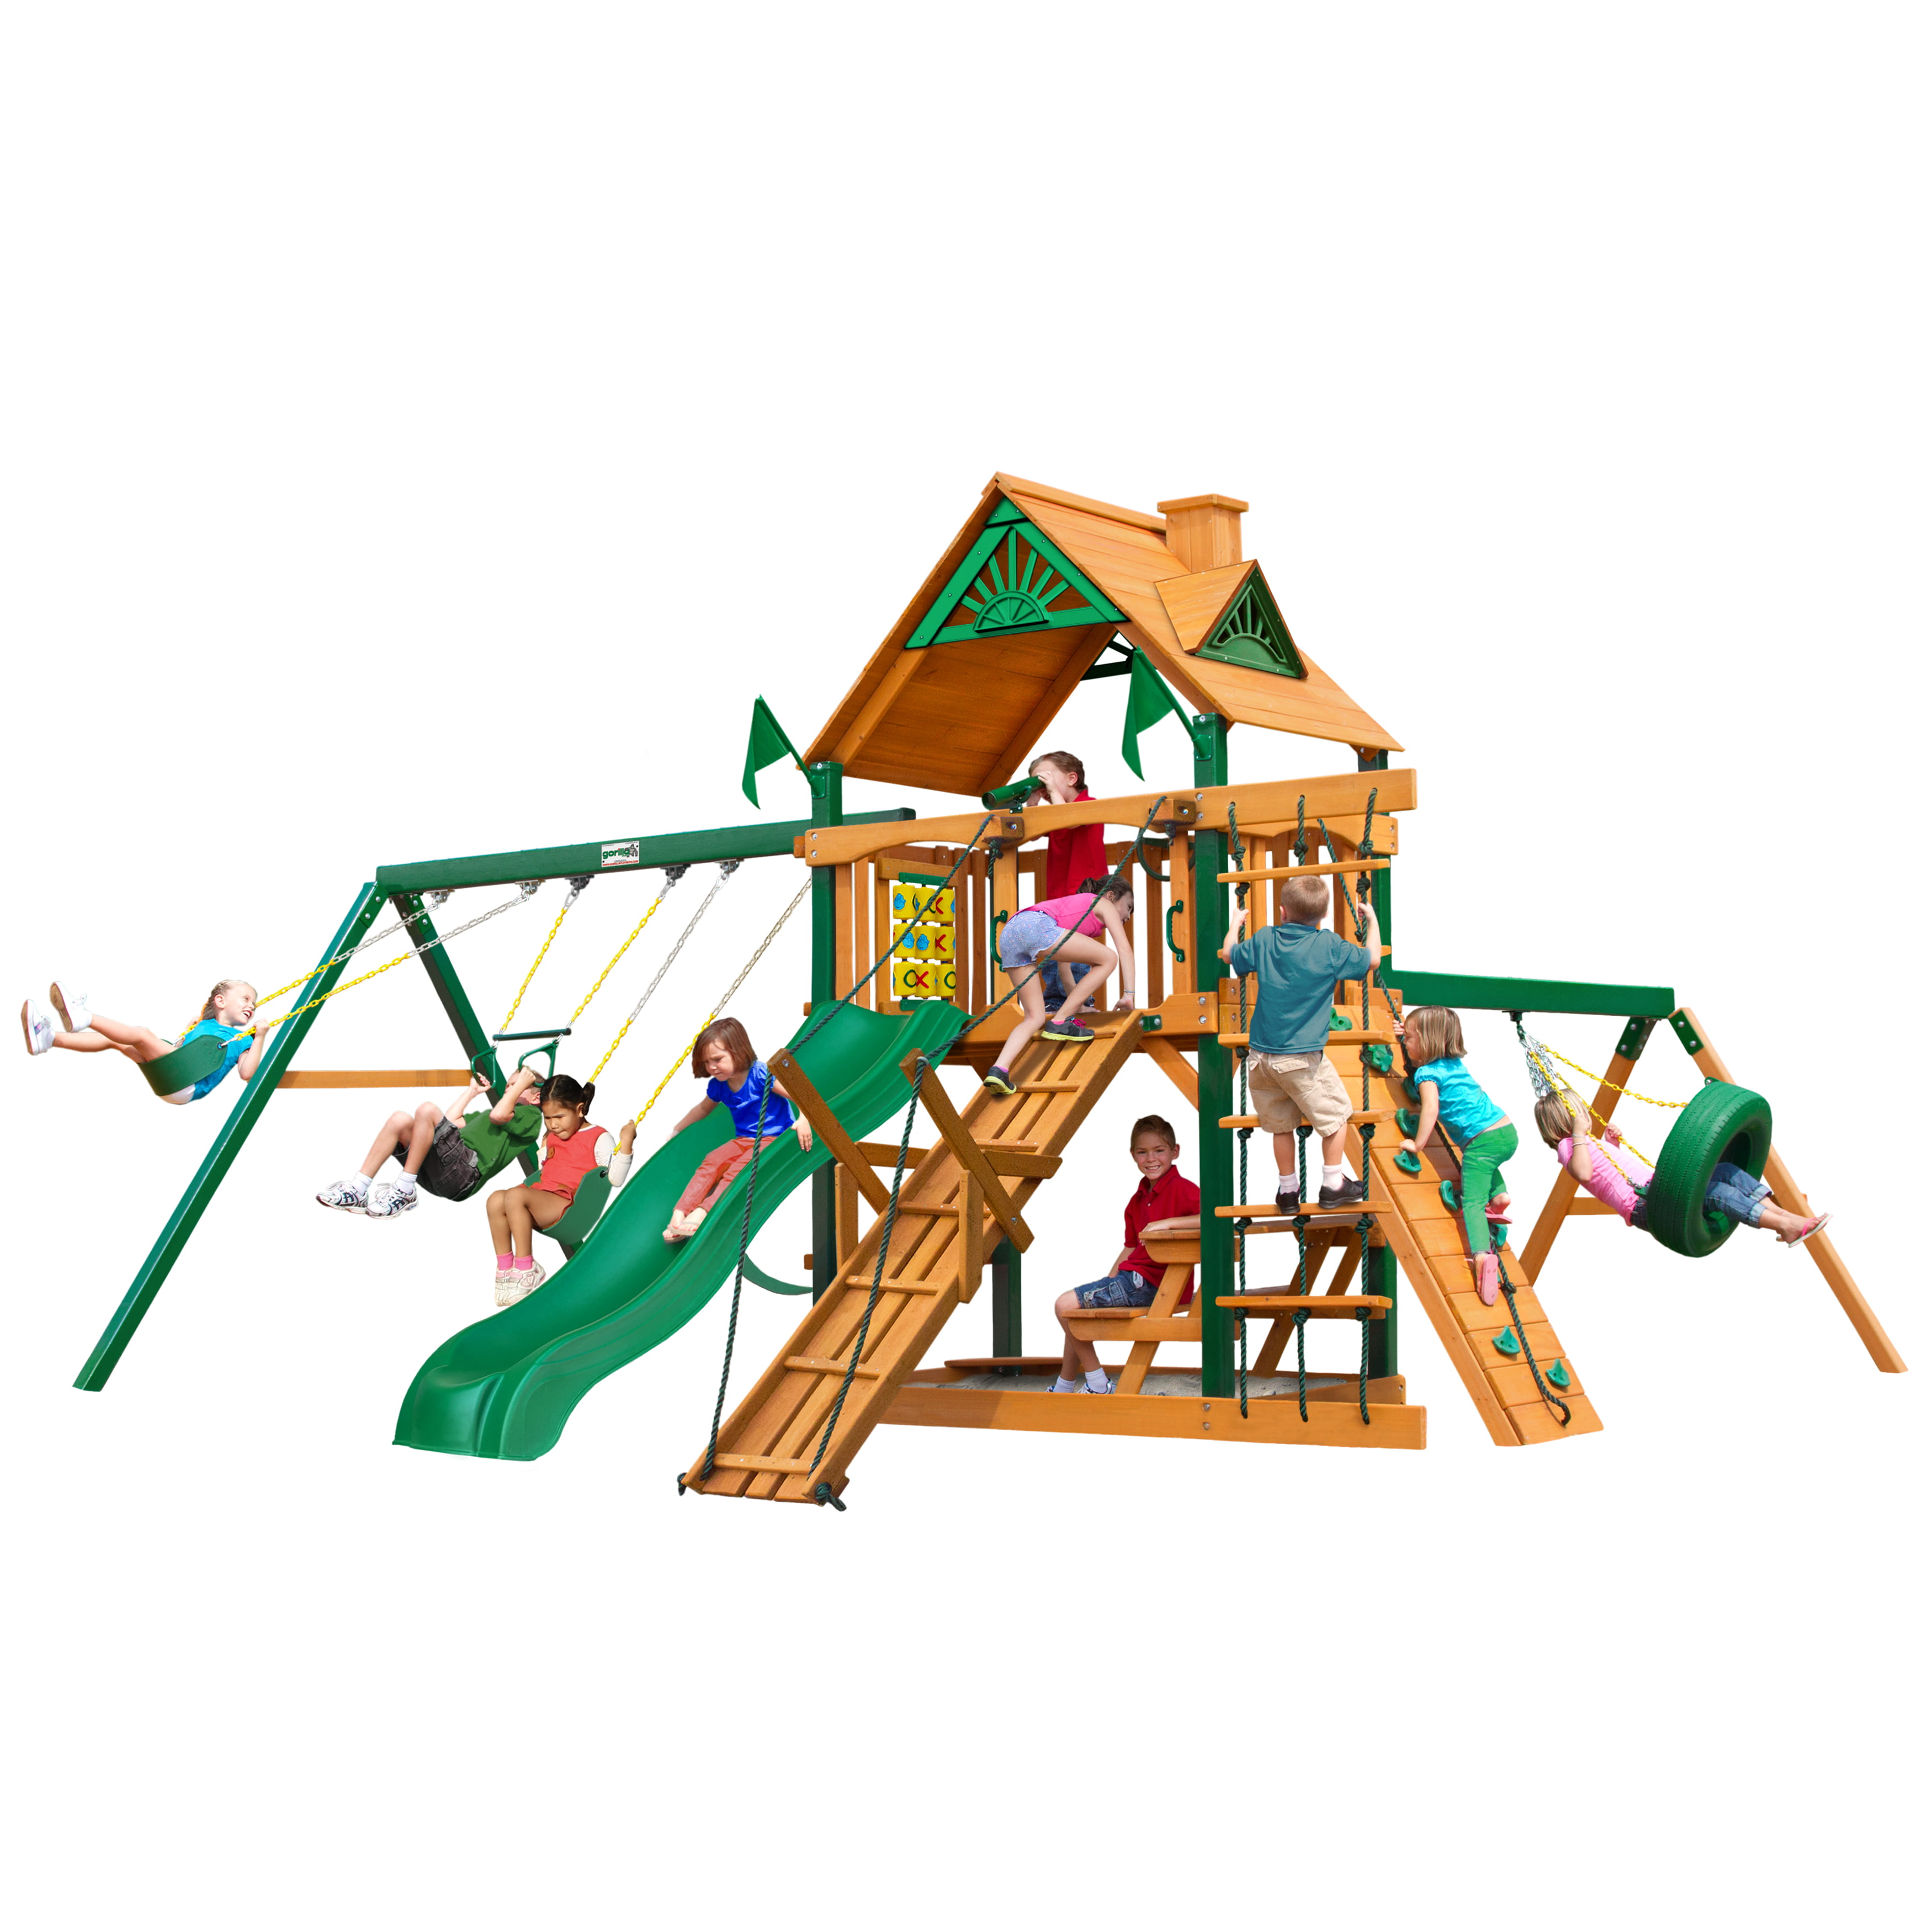 Iron Ductiles for Swing Sets - Gorilla Playsets